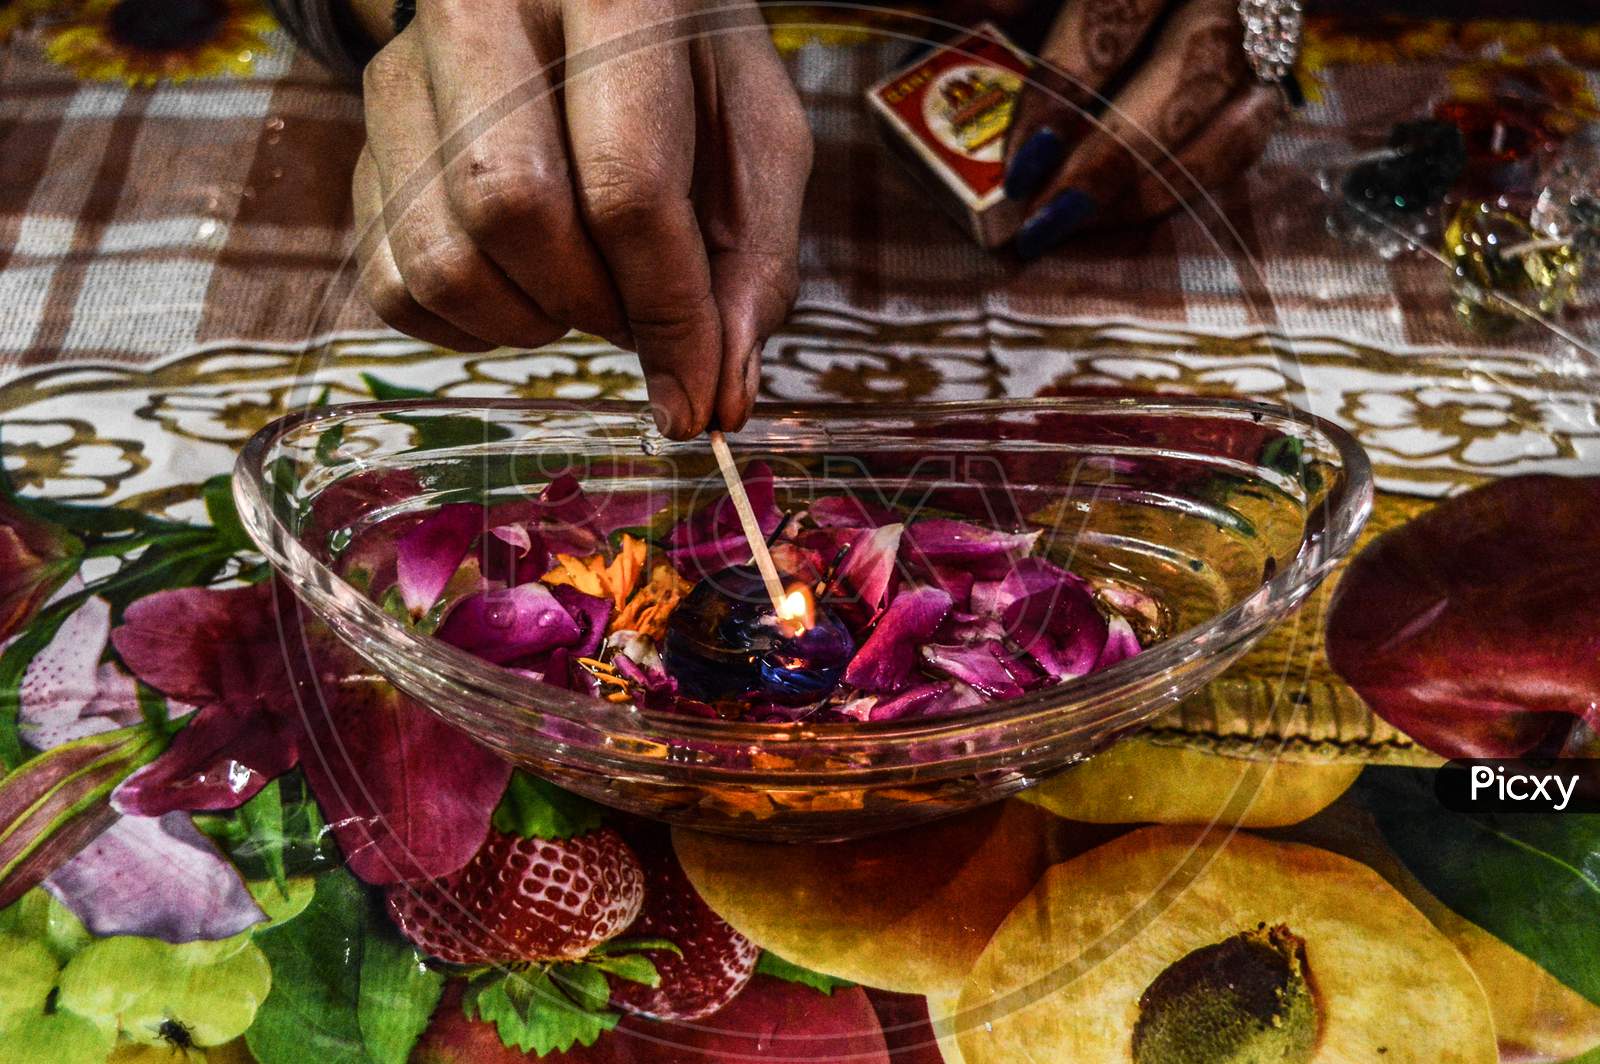 A Indian Lady Lit Up A Jar Is Which Is Loaded With Rose And Candle On Indian Festival Diwali Deepawali With Fire Isolated On Table